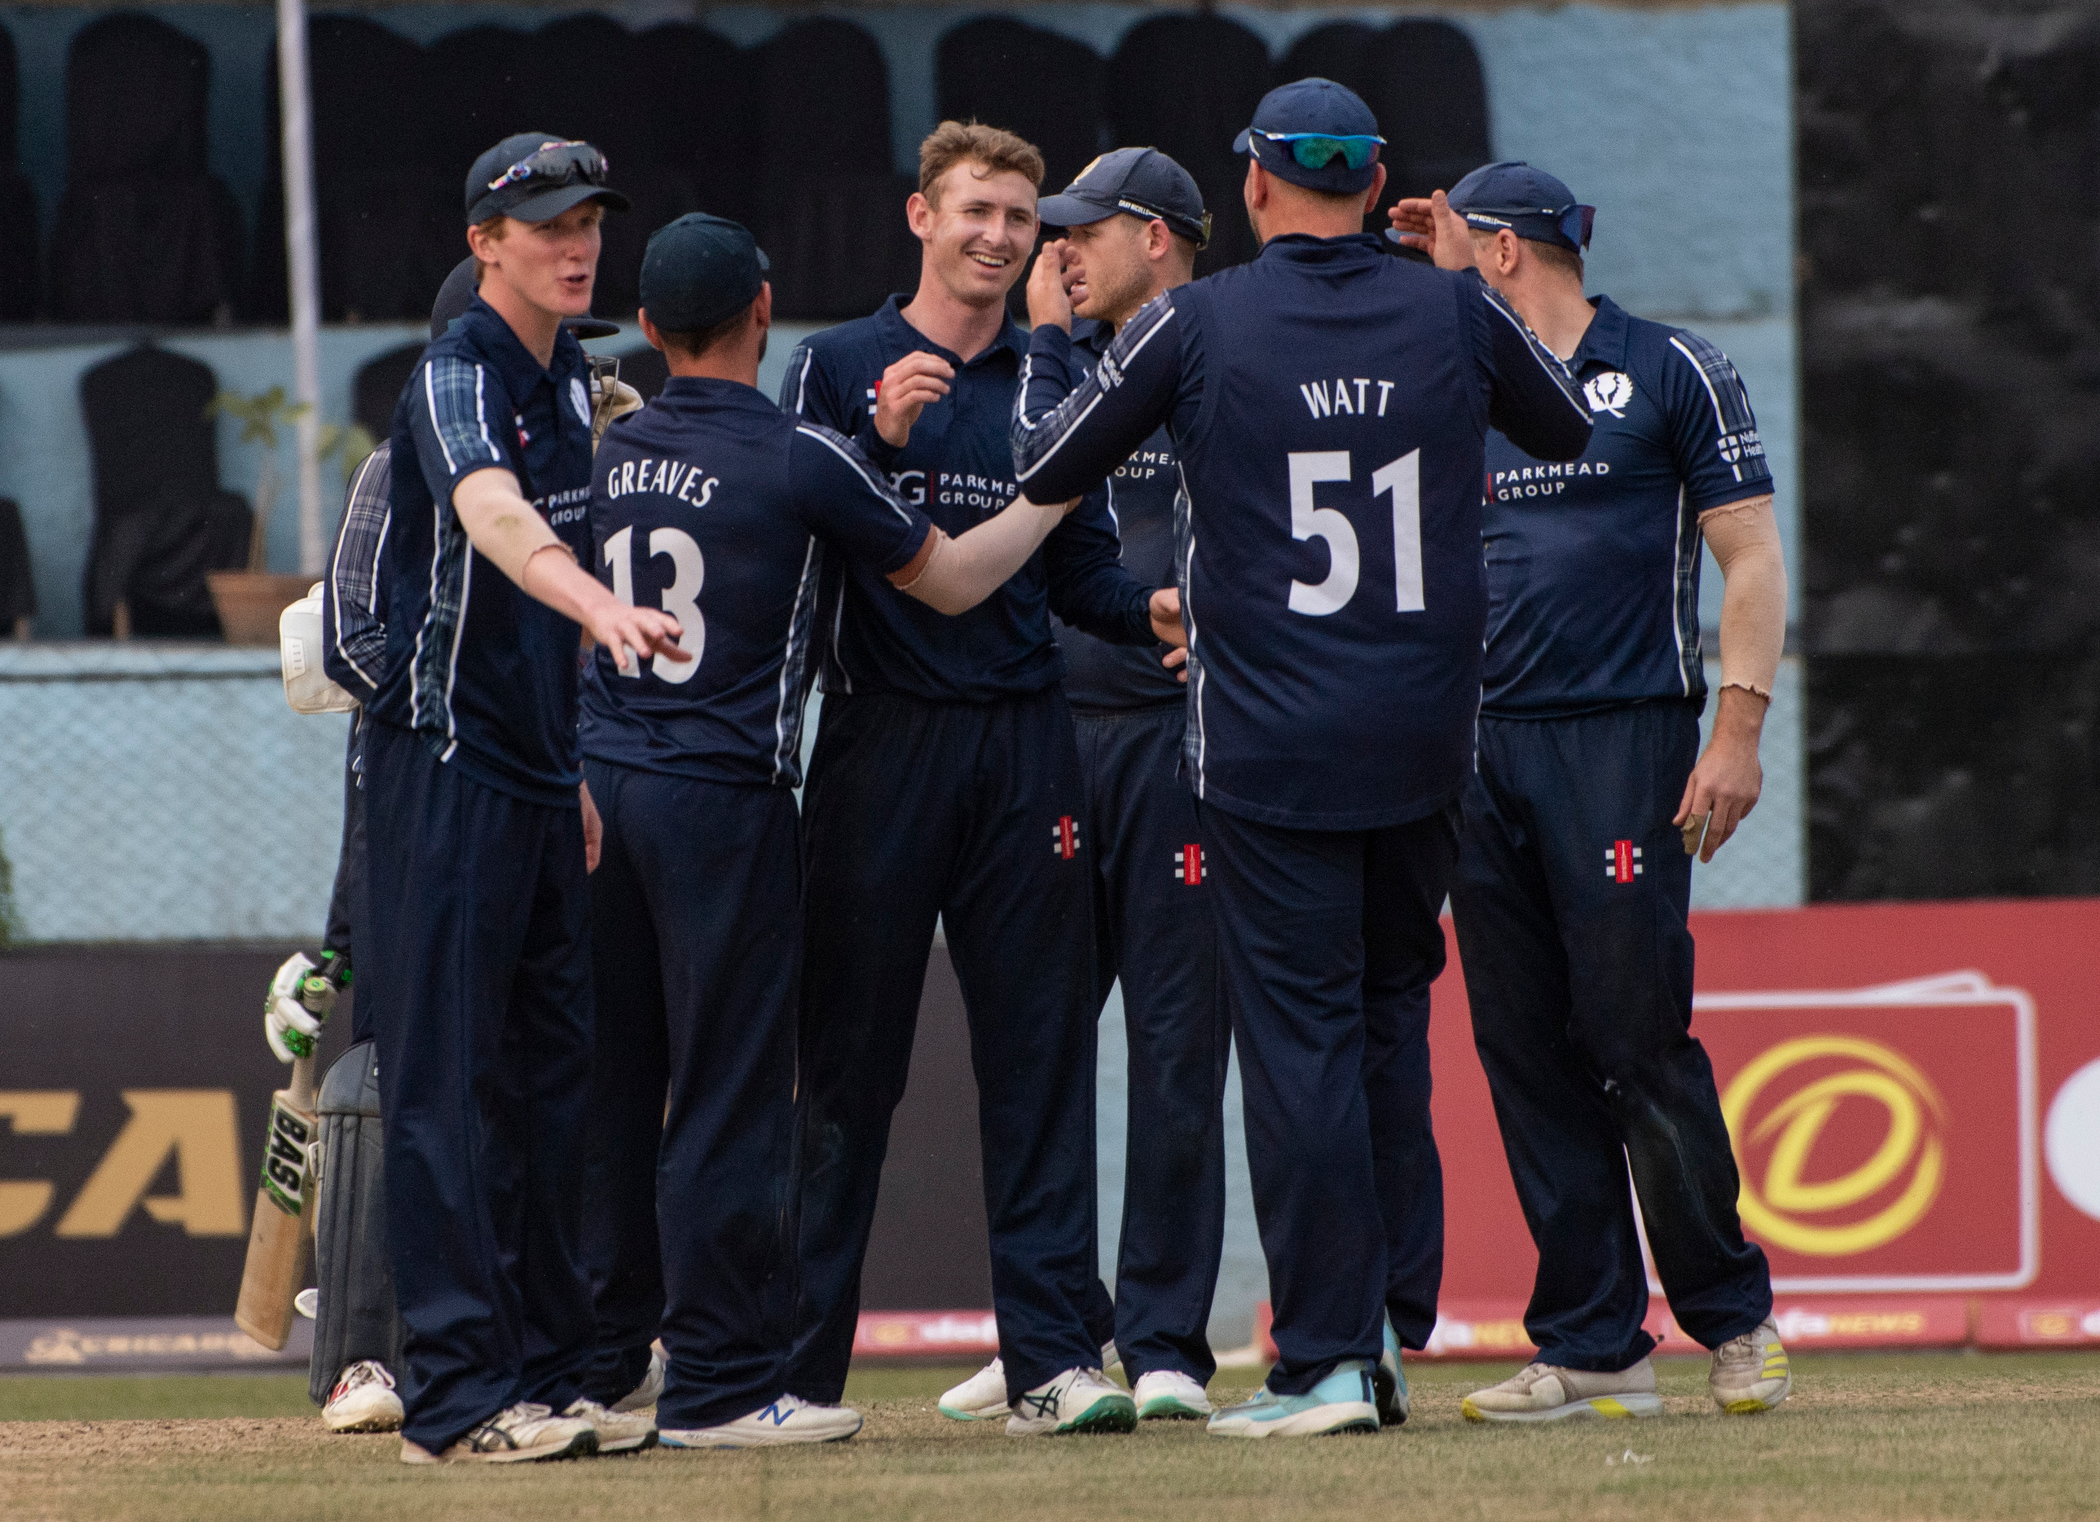 SCOTS FIGHT BACK TO SECURE NAMIBIA WIN